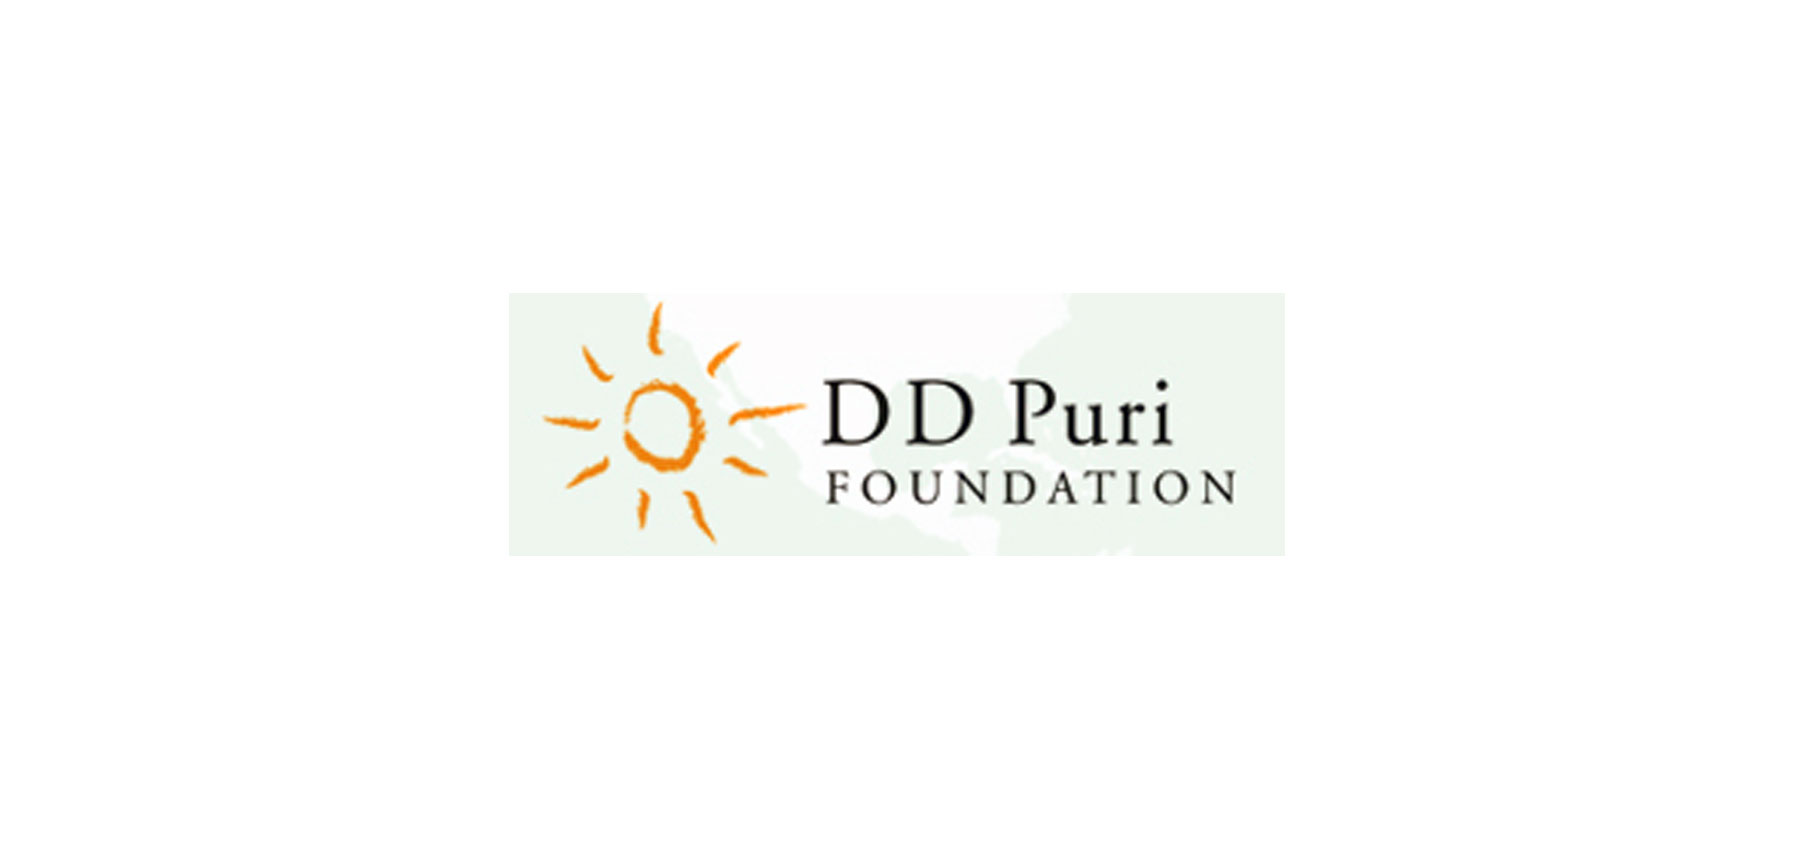 DD Puri foundation - logo shows hand drawn sun and international map in the background